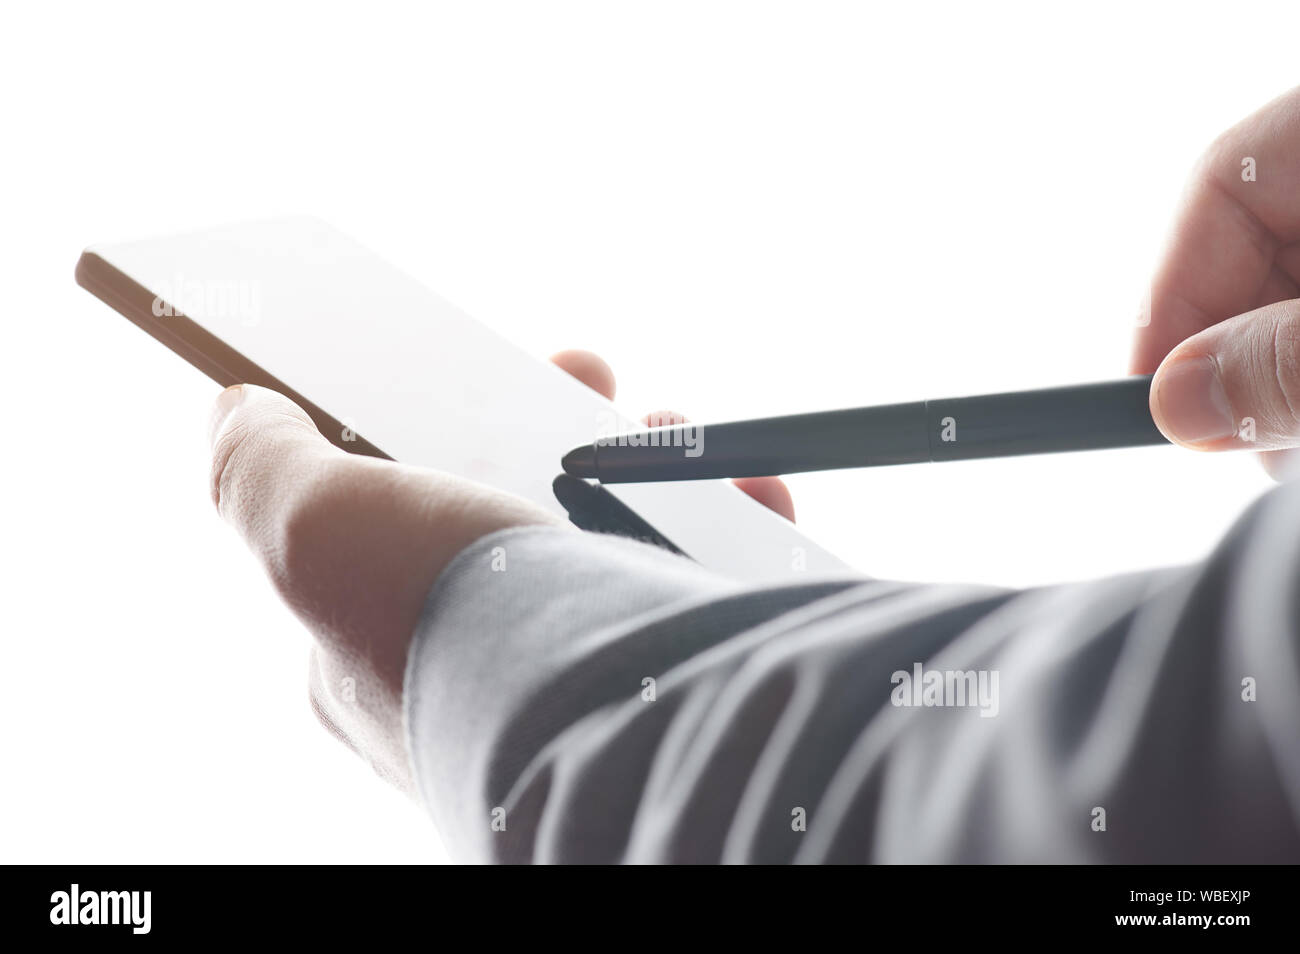 Man pointing with stylus on smartphone screen close up view Stock Photo